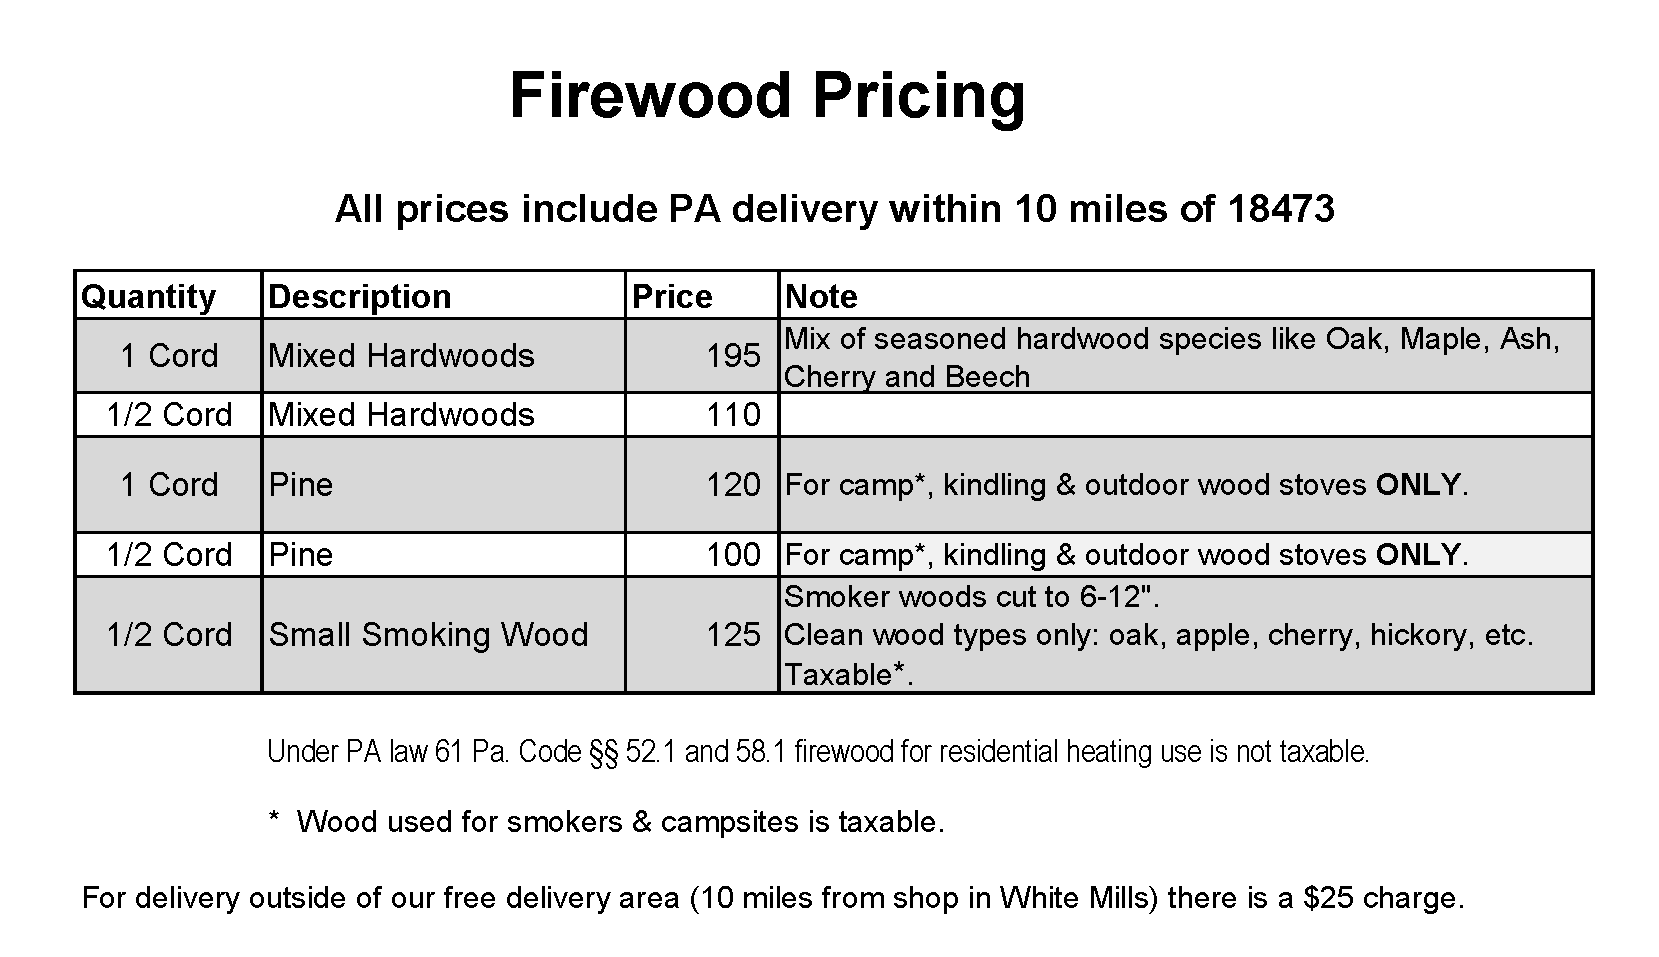 Apple Creek Current Firewood Pricing